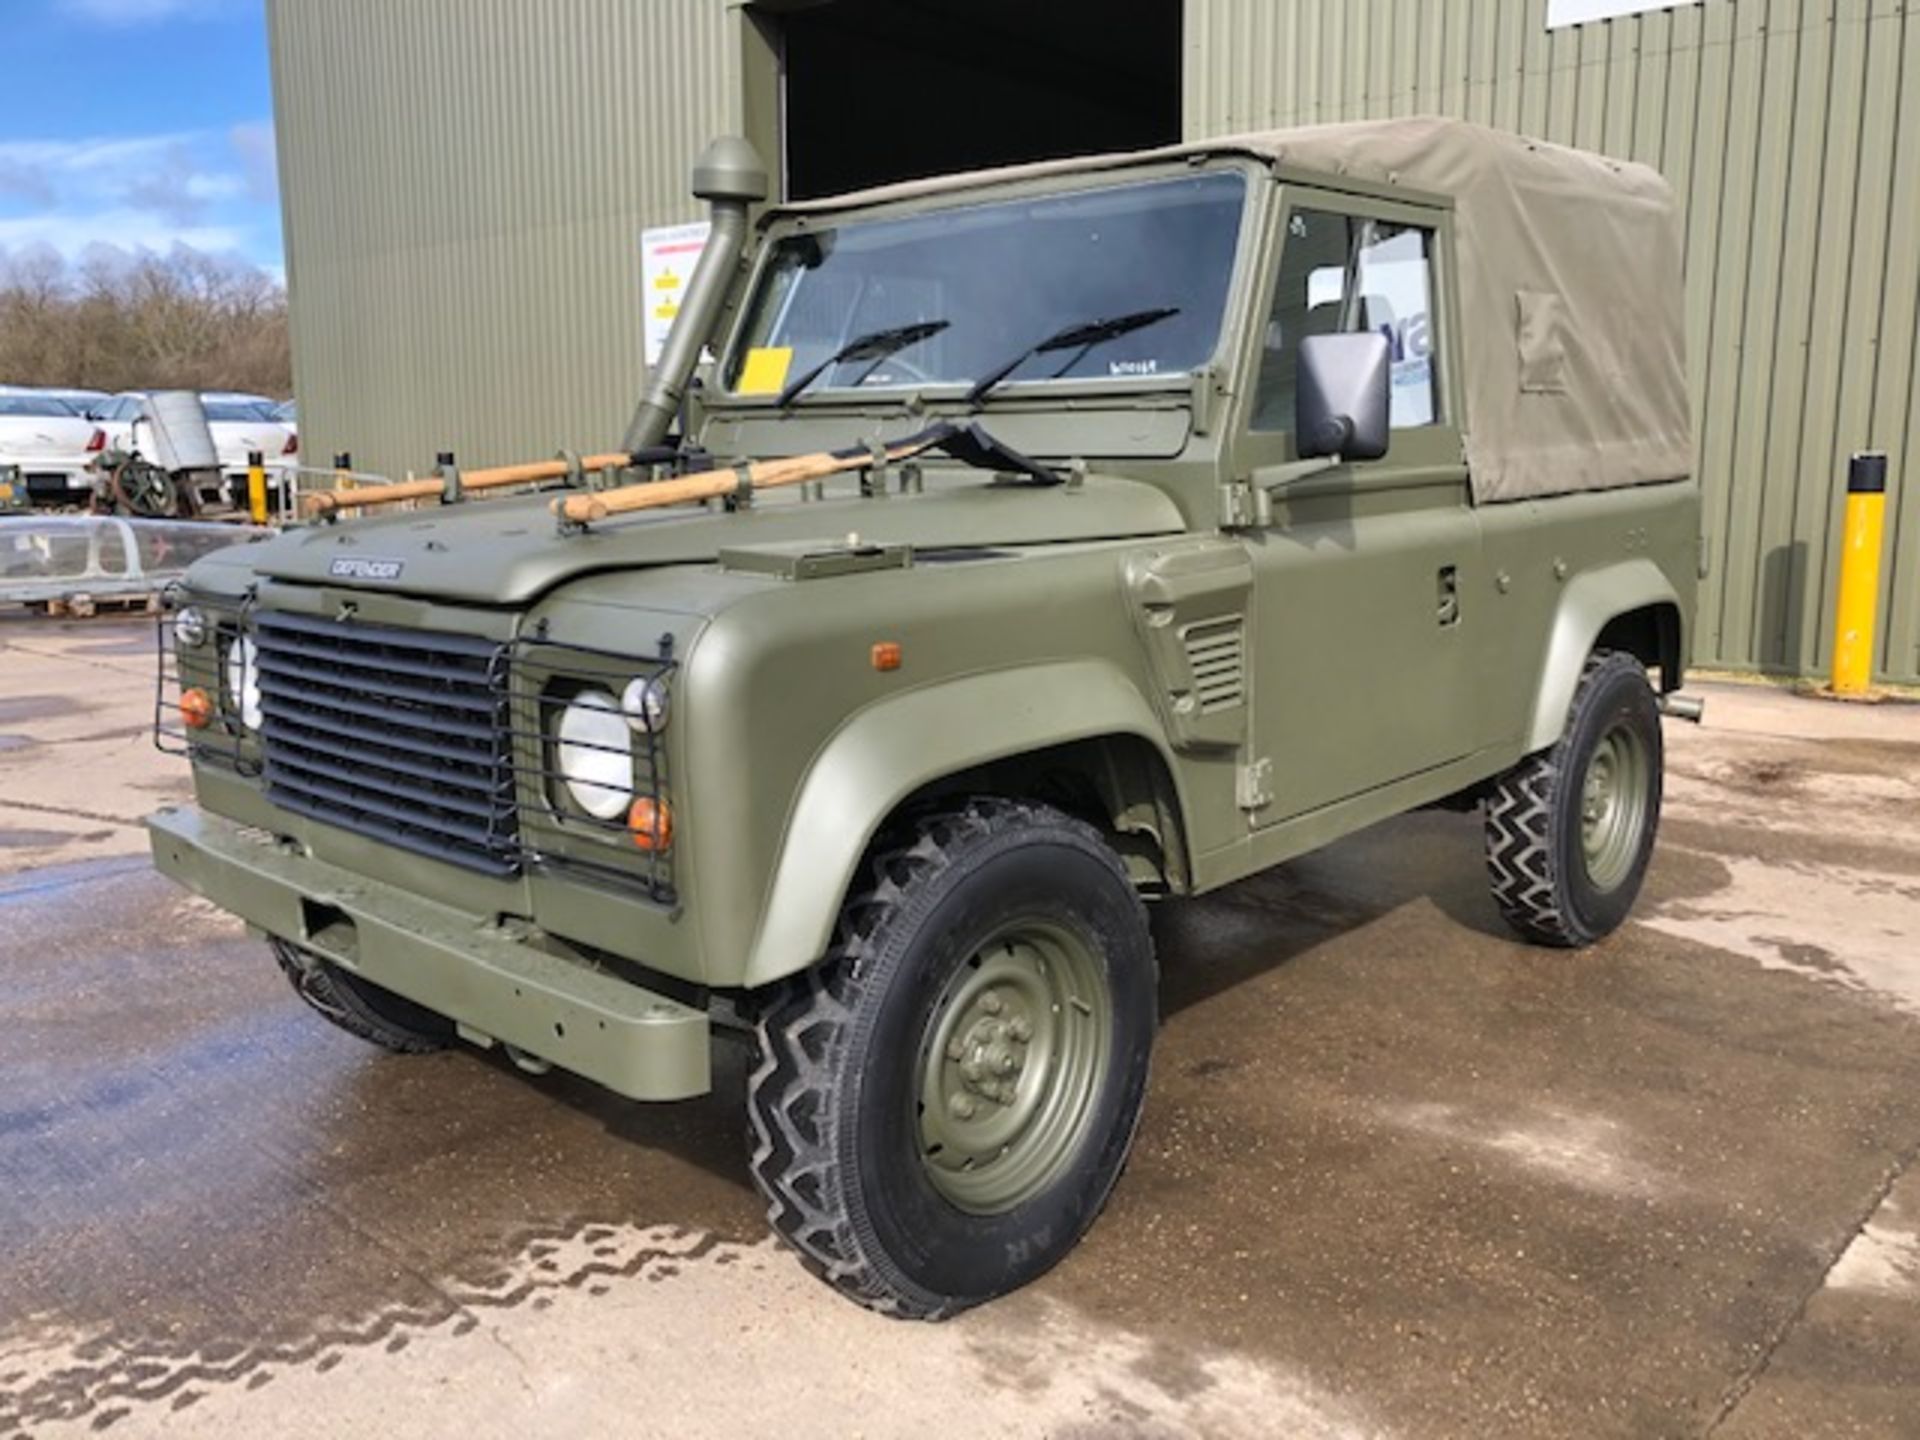 1998 Land Rover Wolf 90 Soft Top with Remus upgrade ONLY 12,162km - approx 7.000 miles! - Image 3 of 48